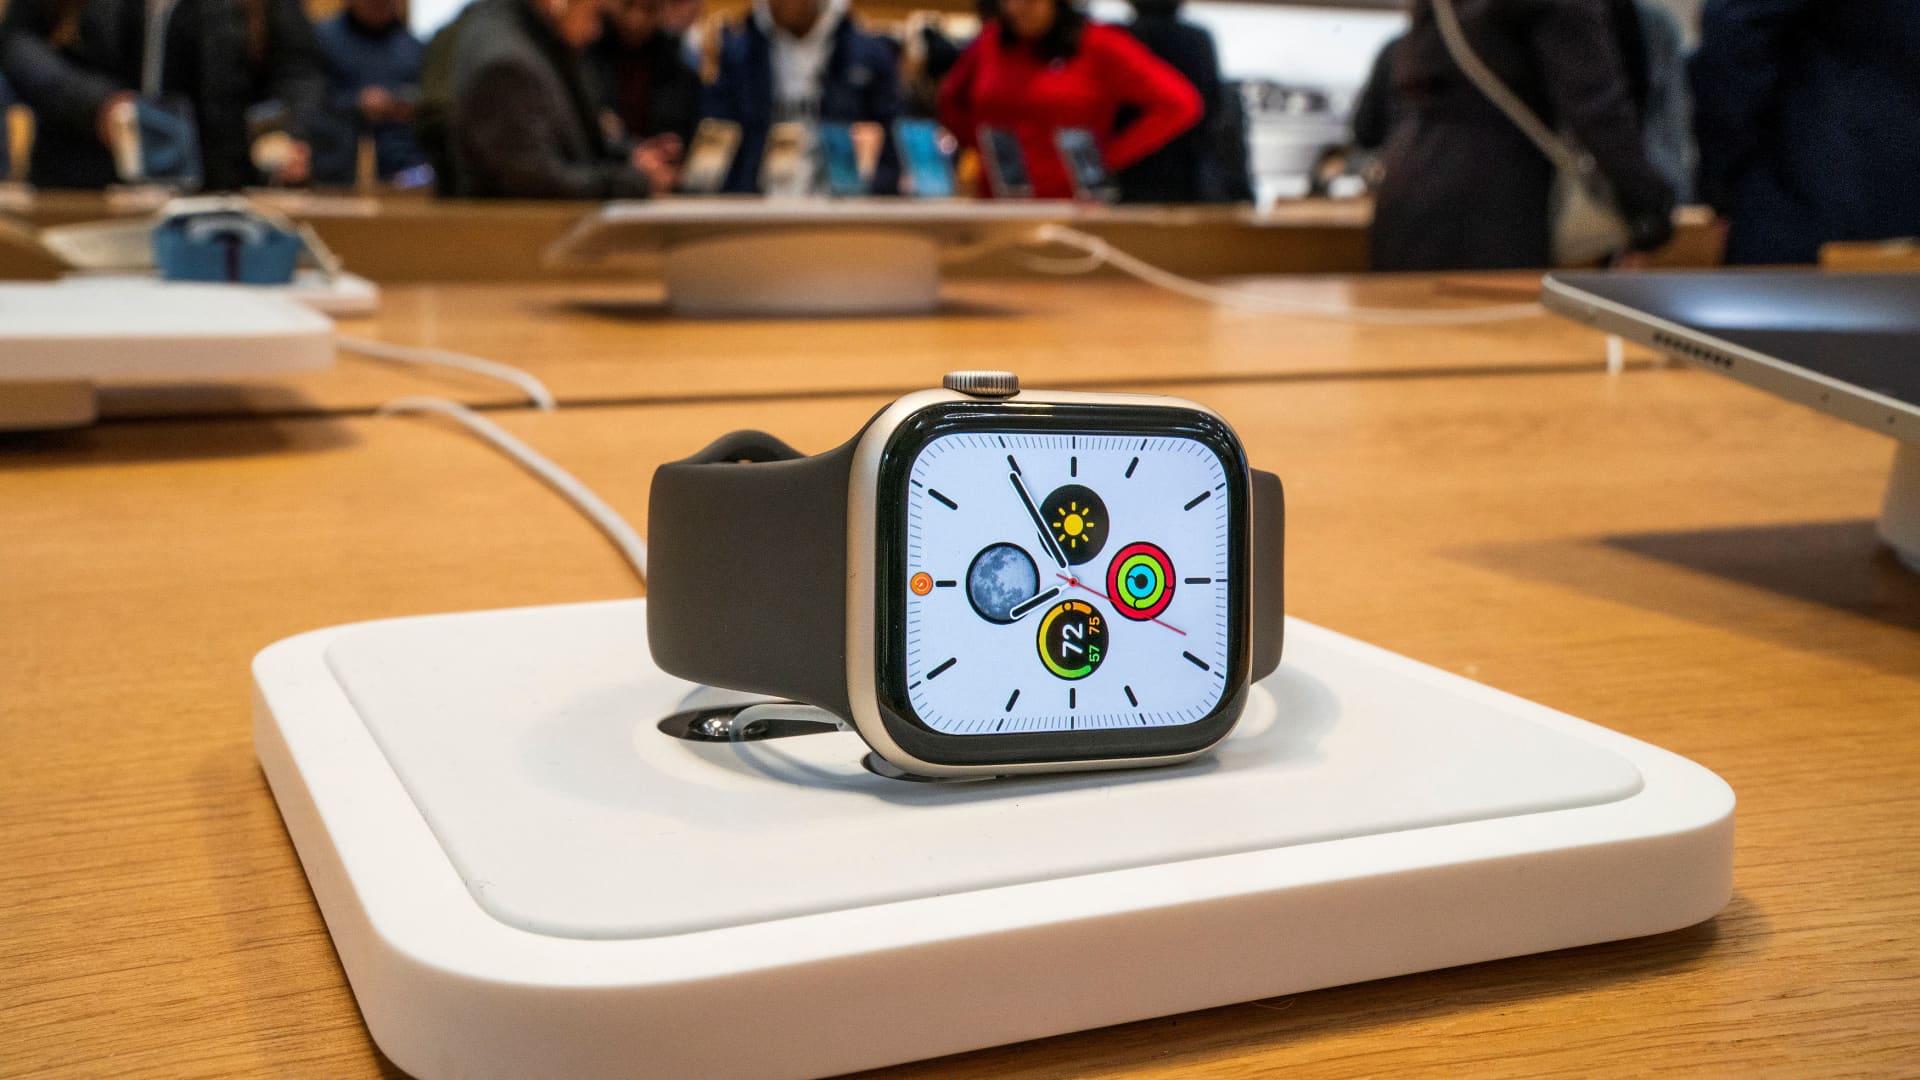 Apple will sell latest Apple Watch models again after import ban temporarily stopped by U.S. appeals court 